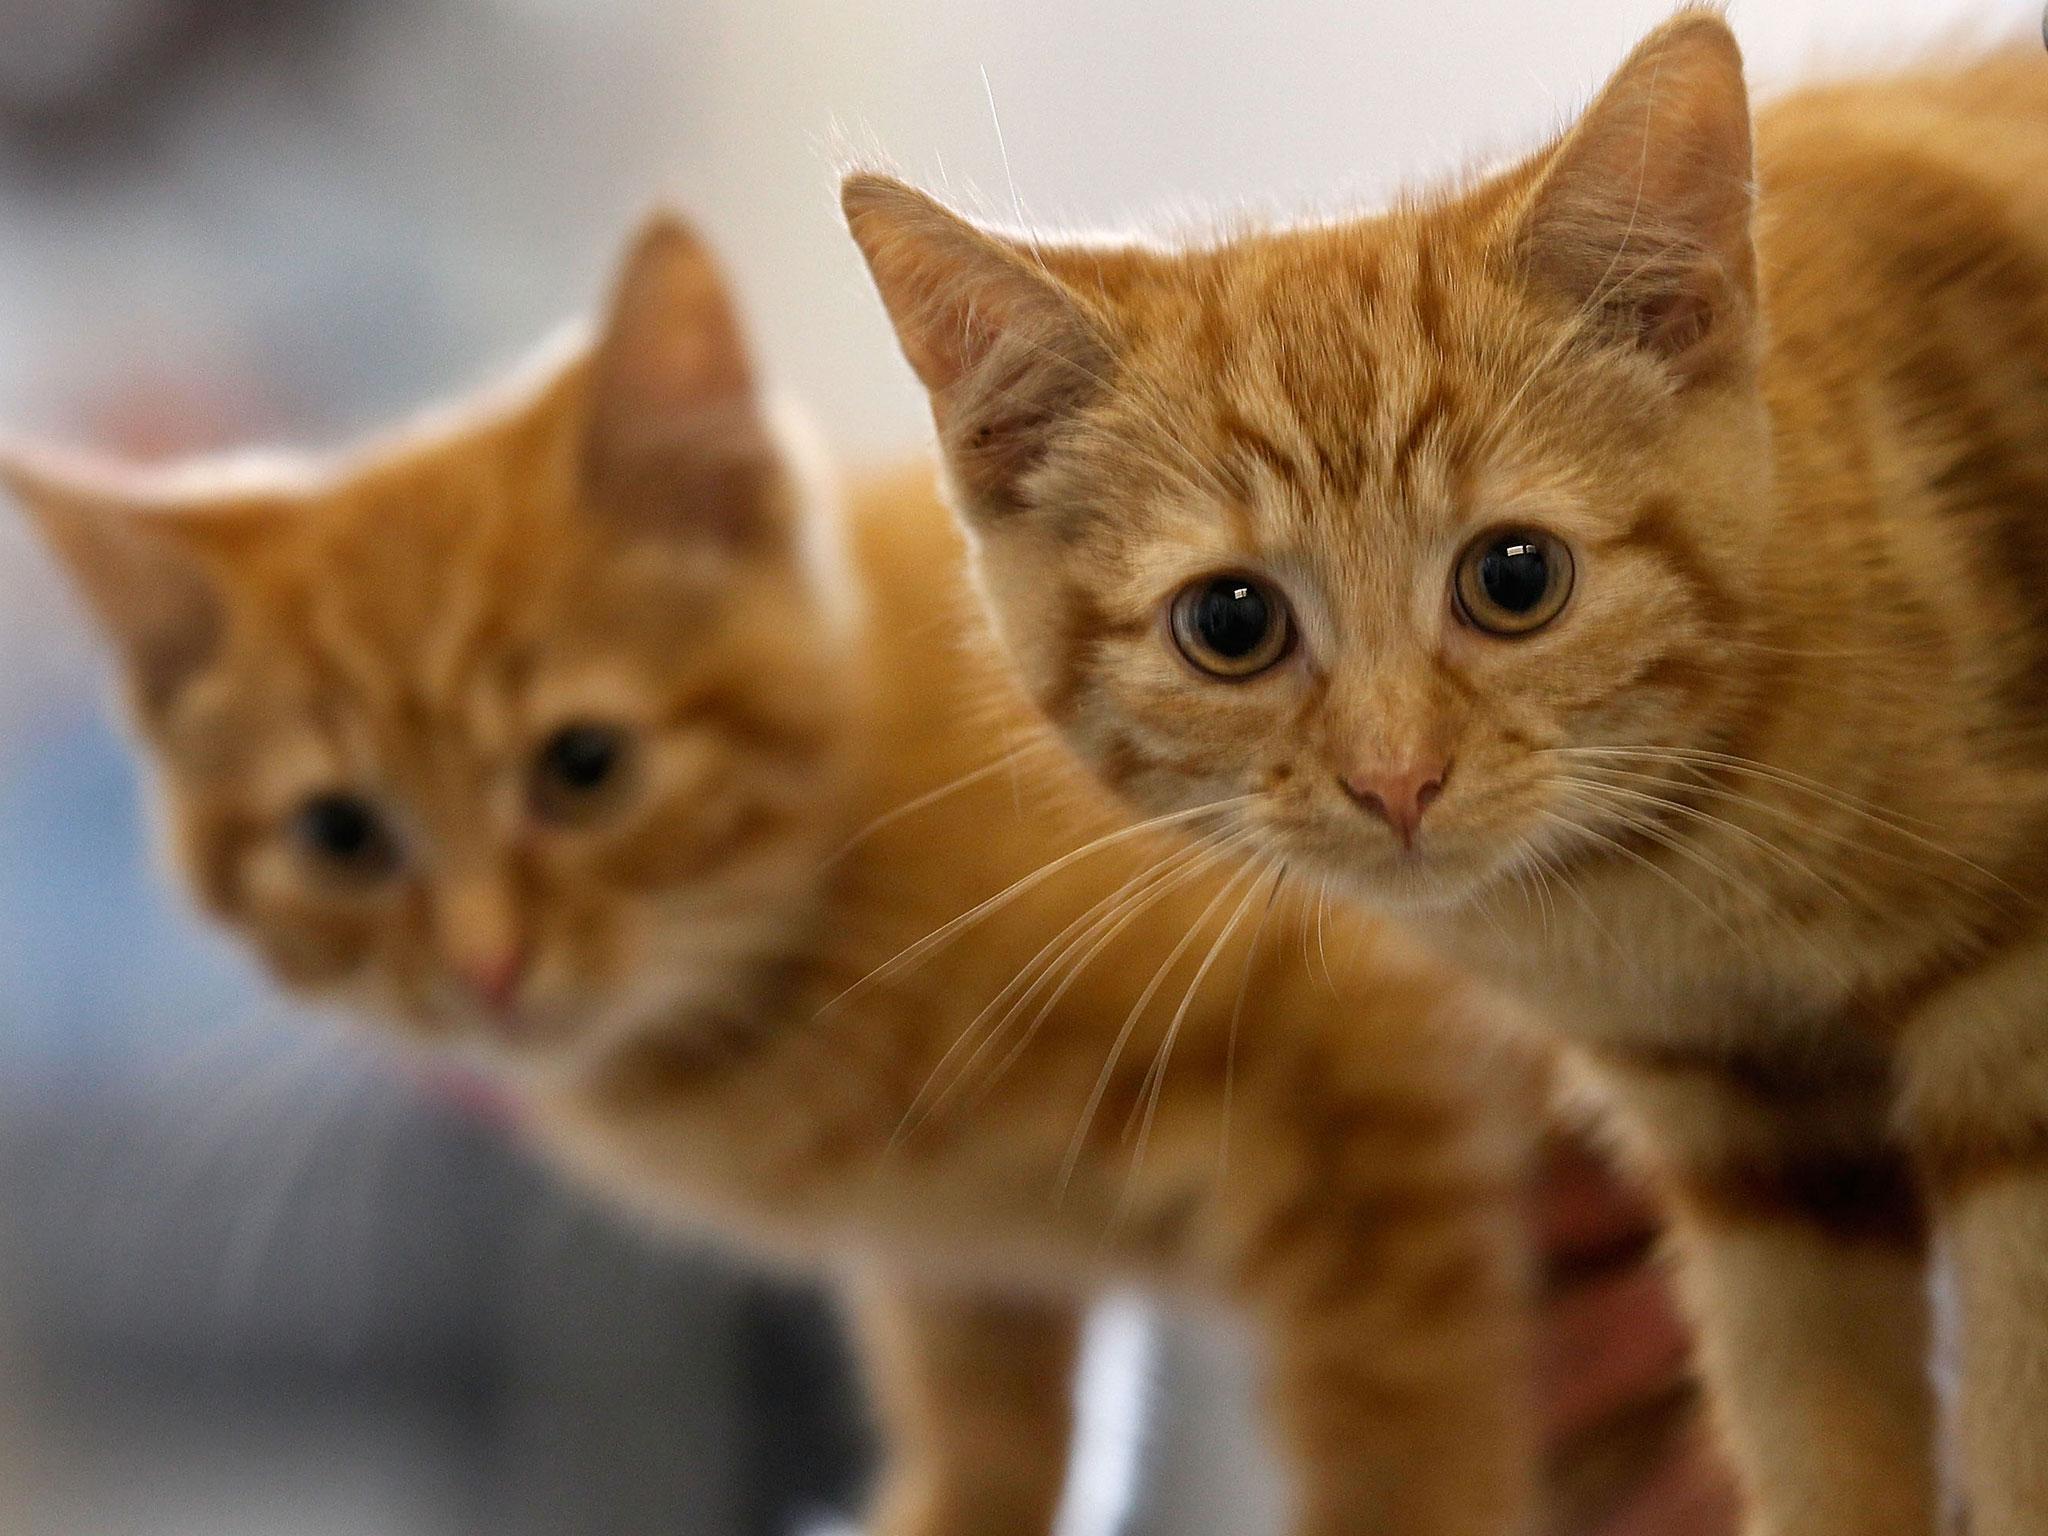 Cats have been found decapitated and left for their owners to discover (file photo)